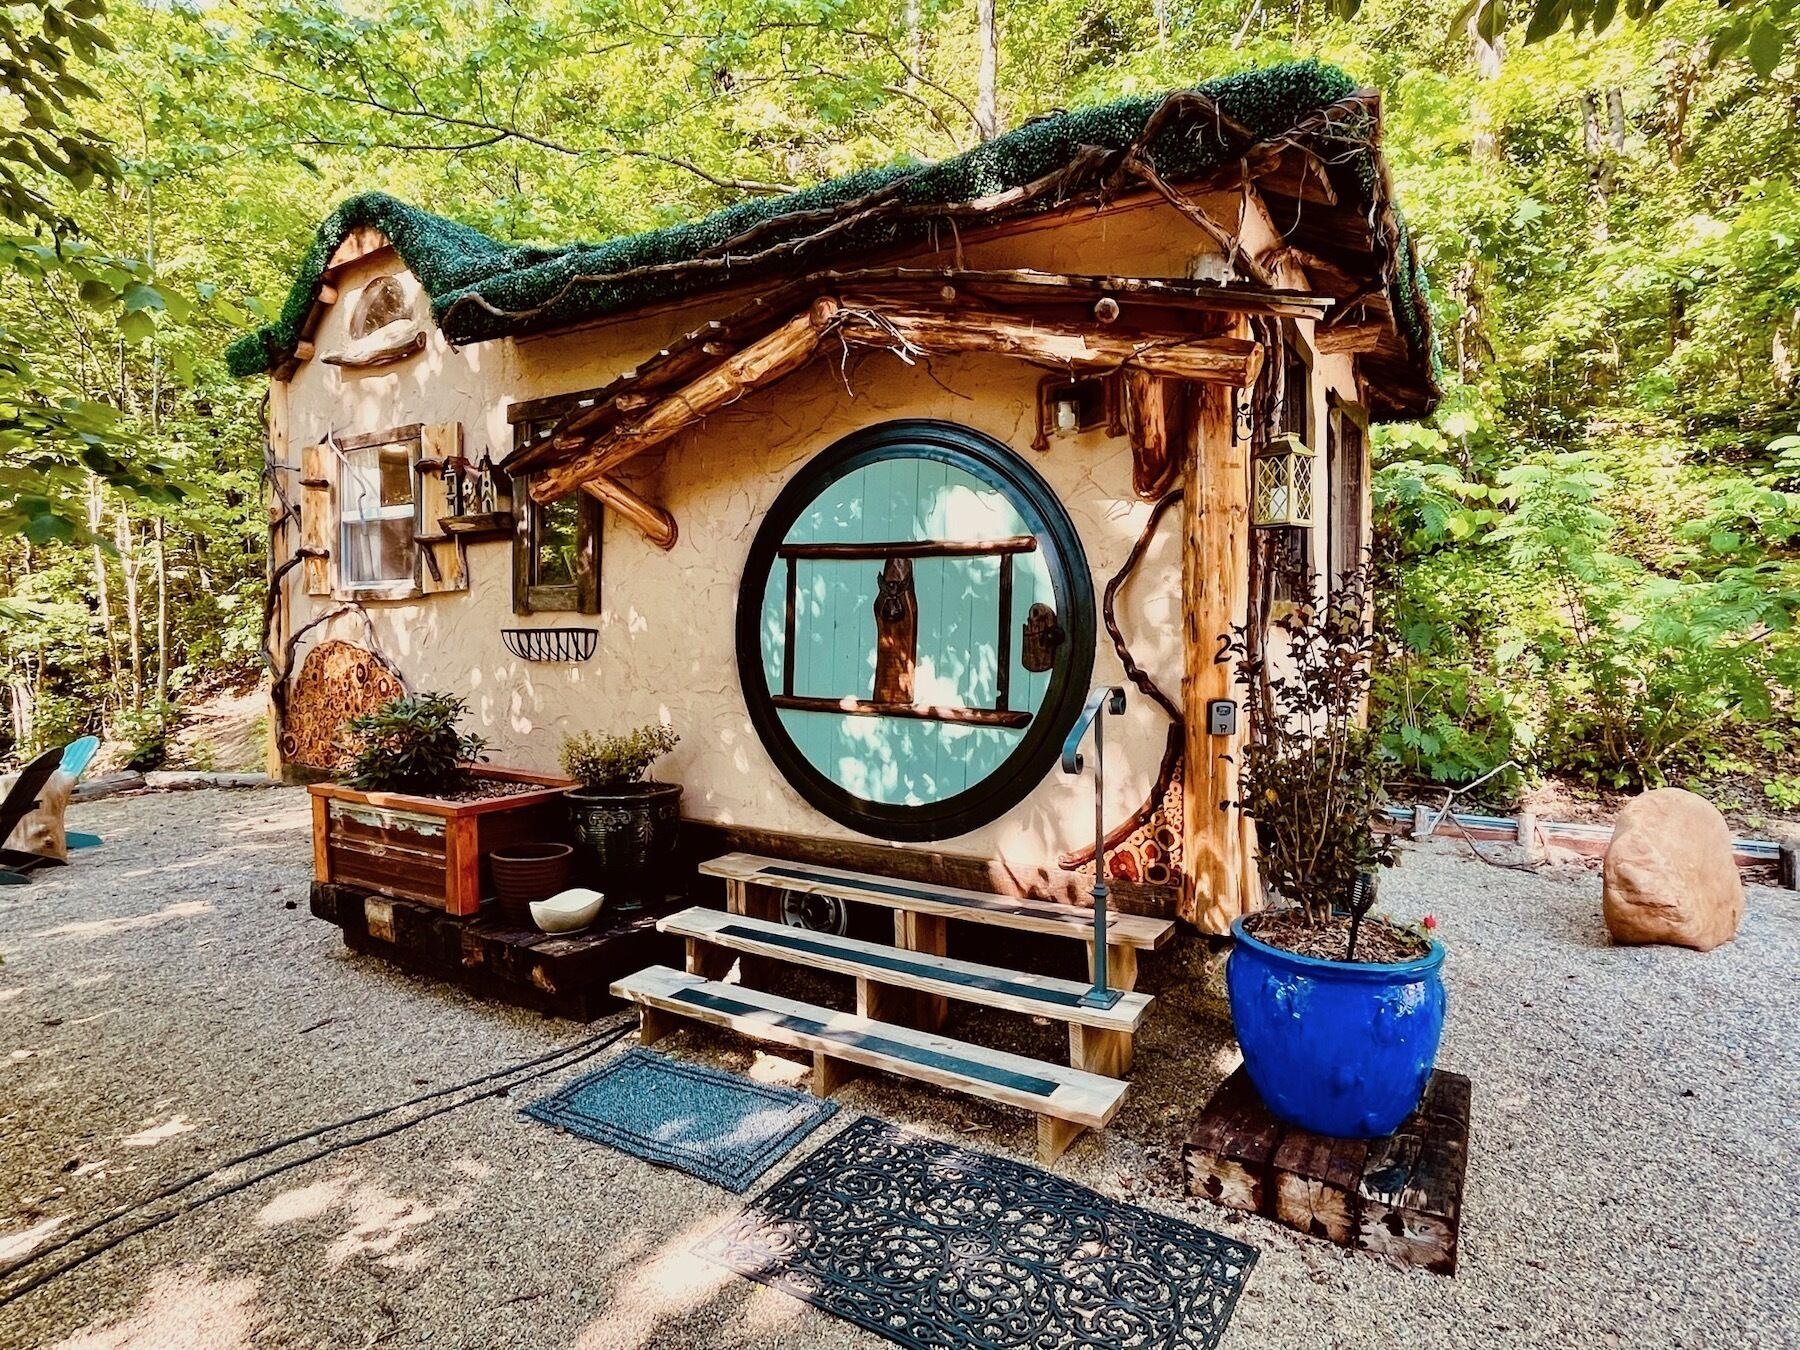 Pet Friendly Woodland Hobbit-Inspired Tiny House in the Smokies